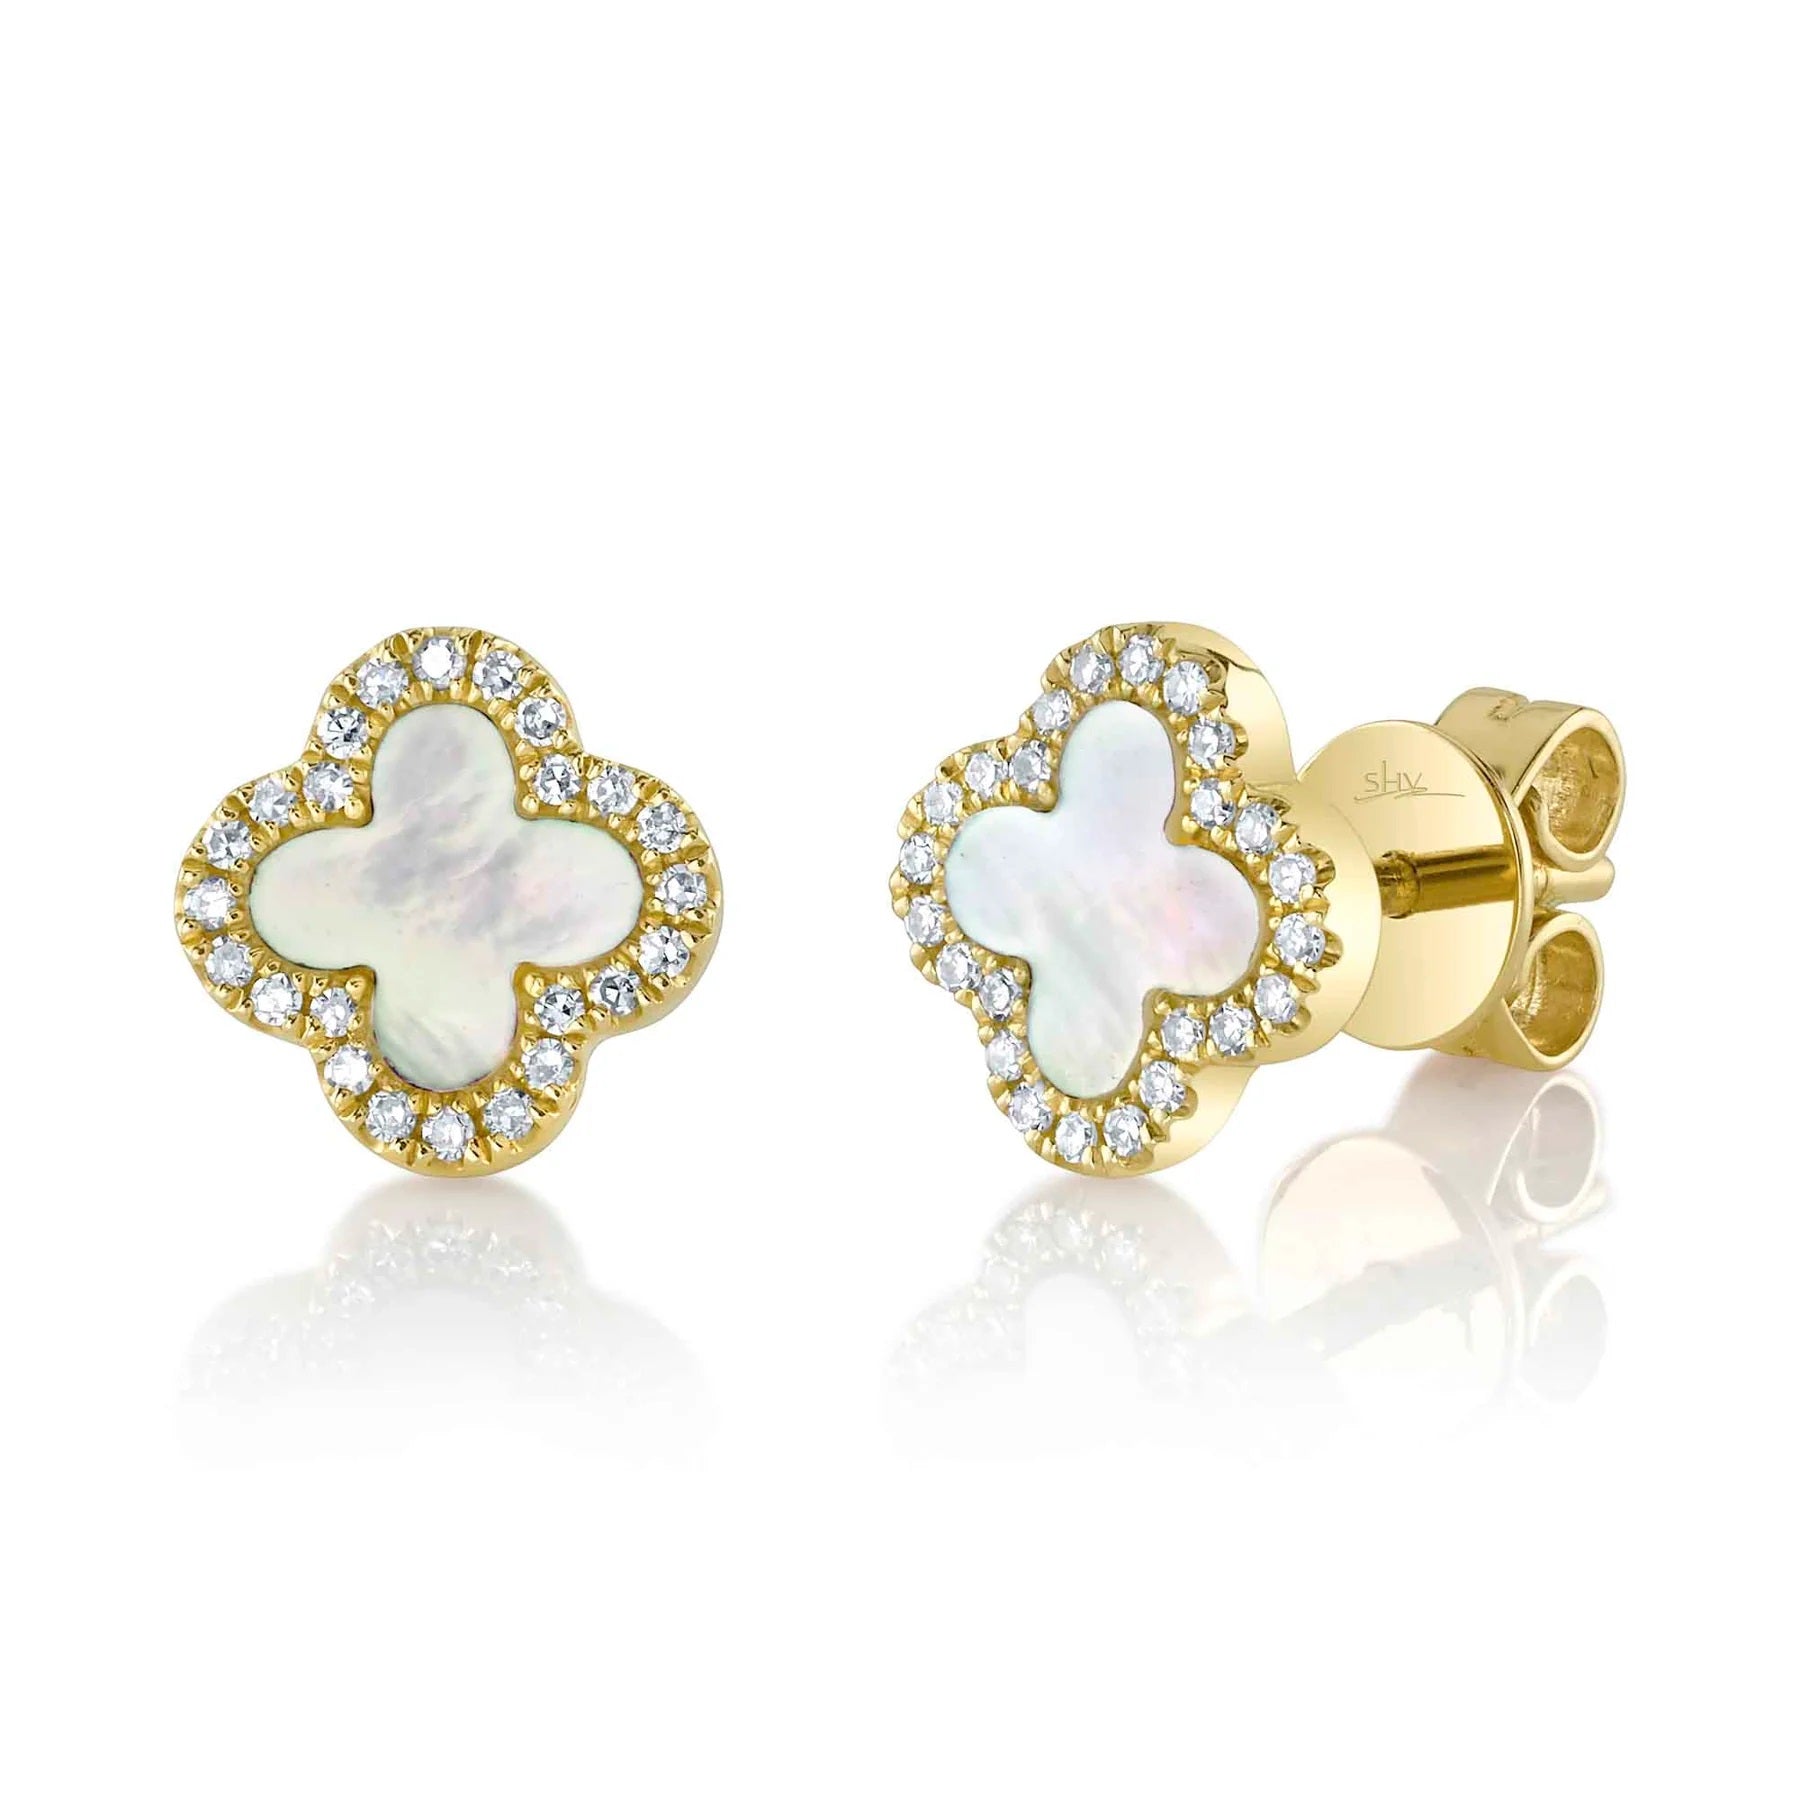 14KY.11CT DIAMOND/.35CT MOTHER OF PEARL CLOVER EARRING